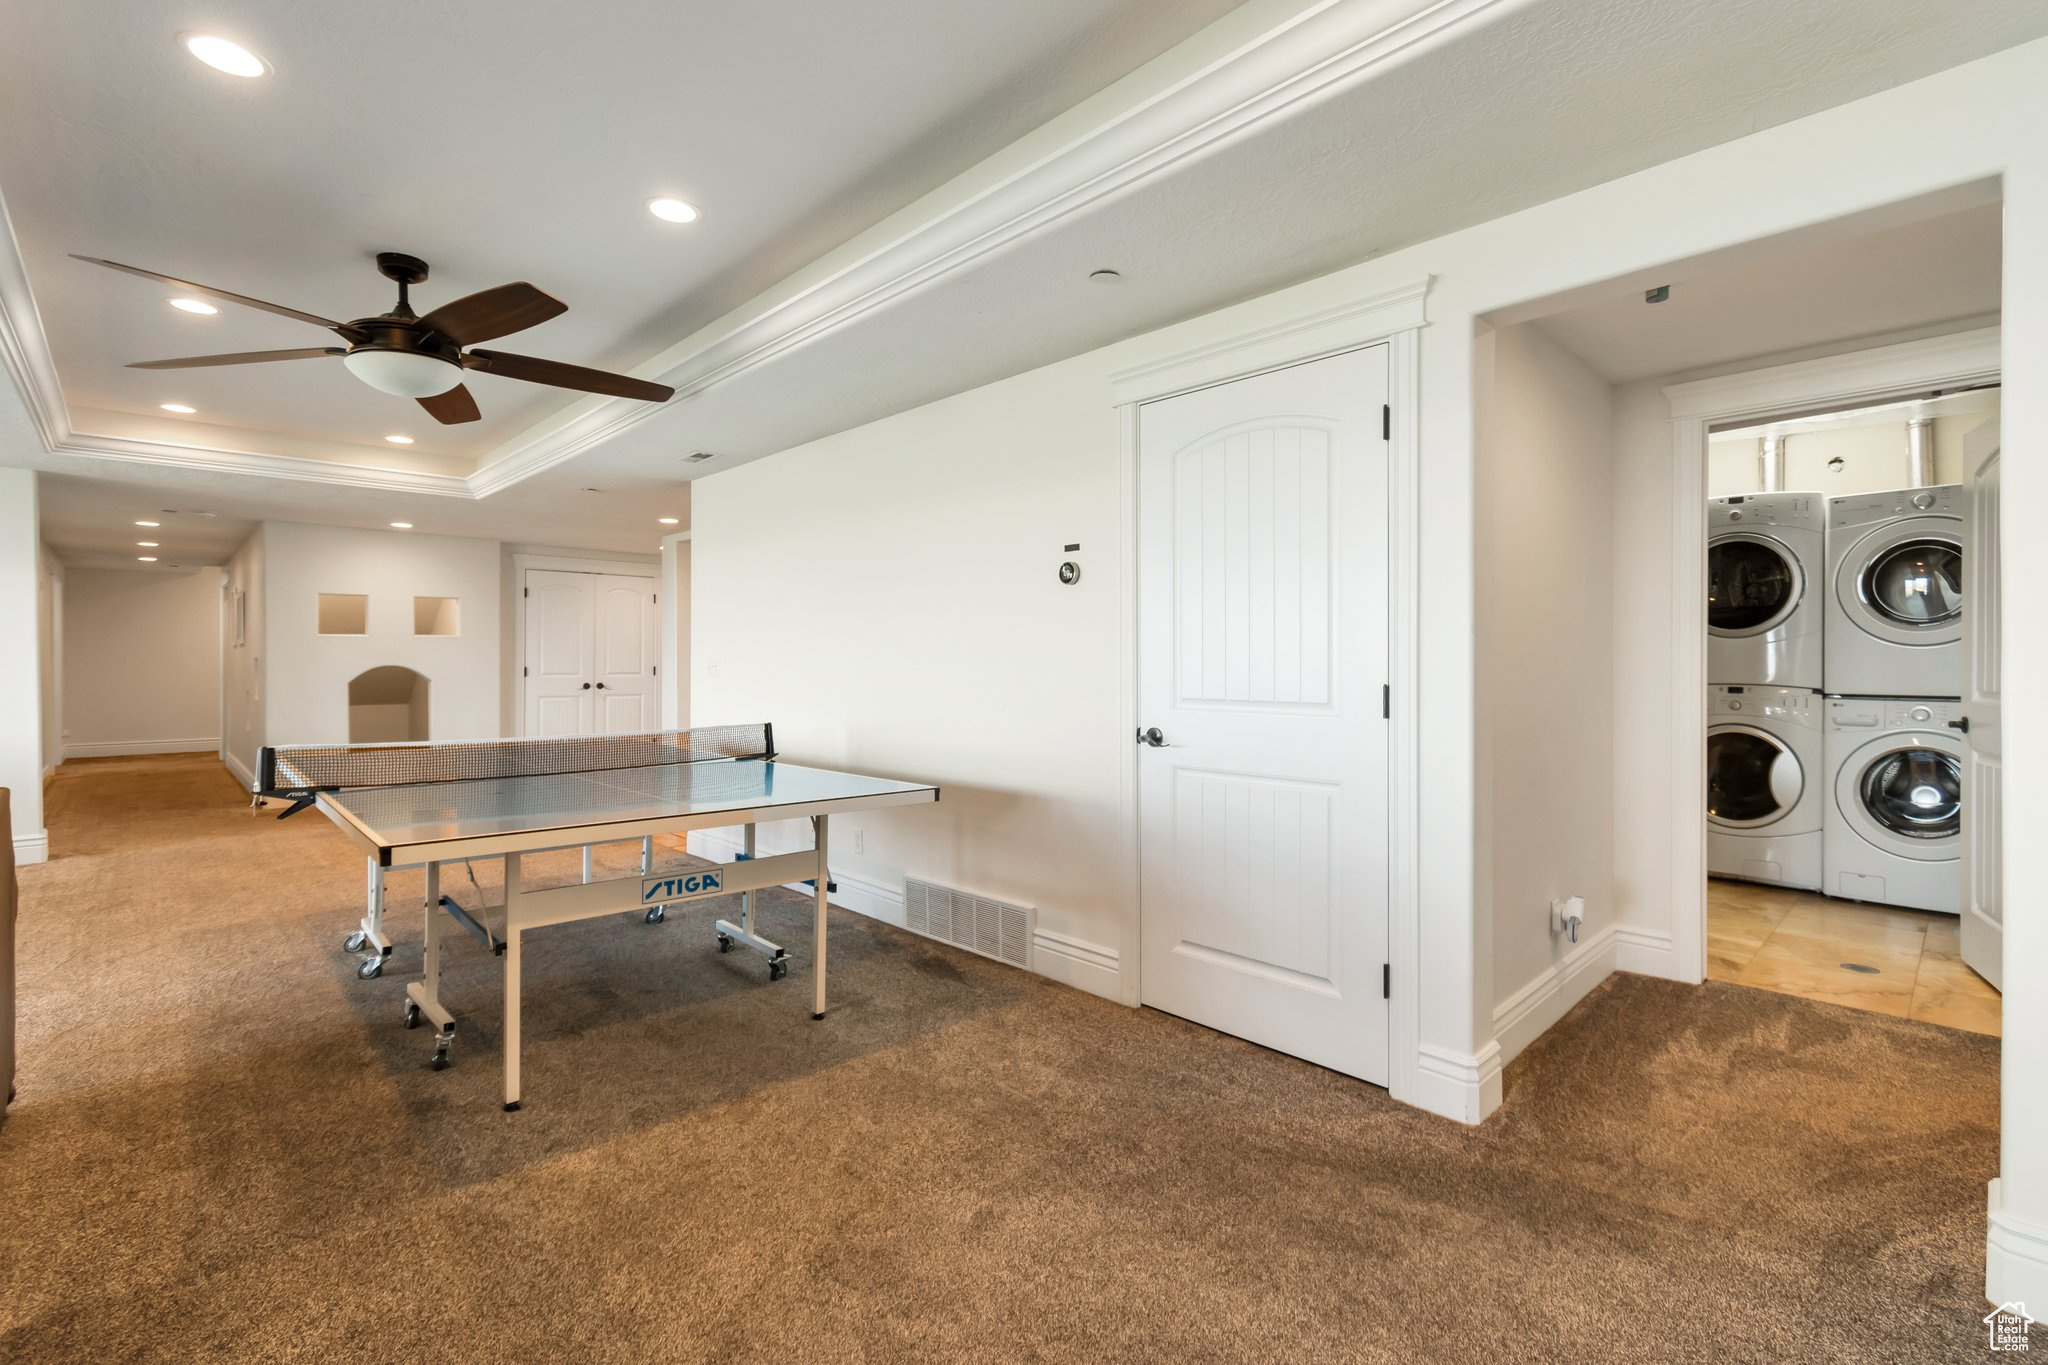 Game room with carpet floors, ceiling fan, a tray ceiling, and washer and clothes dryer